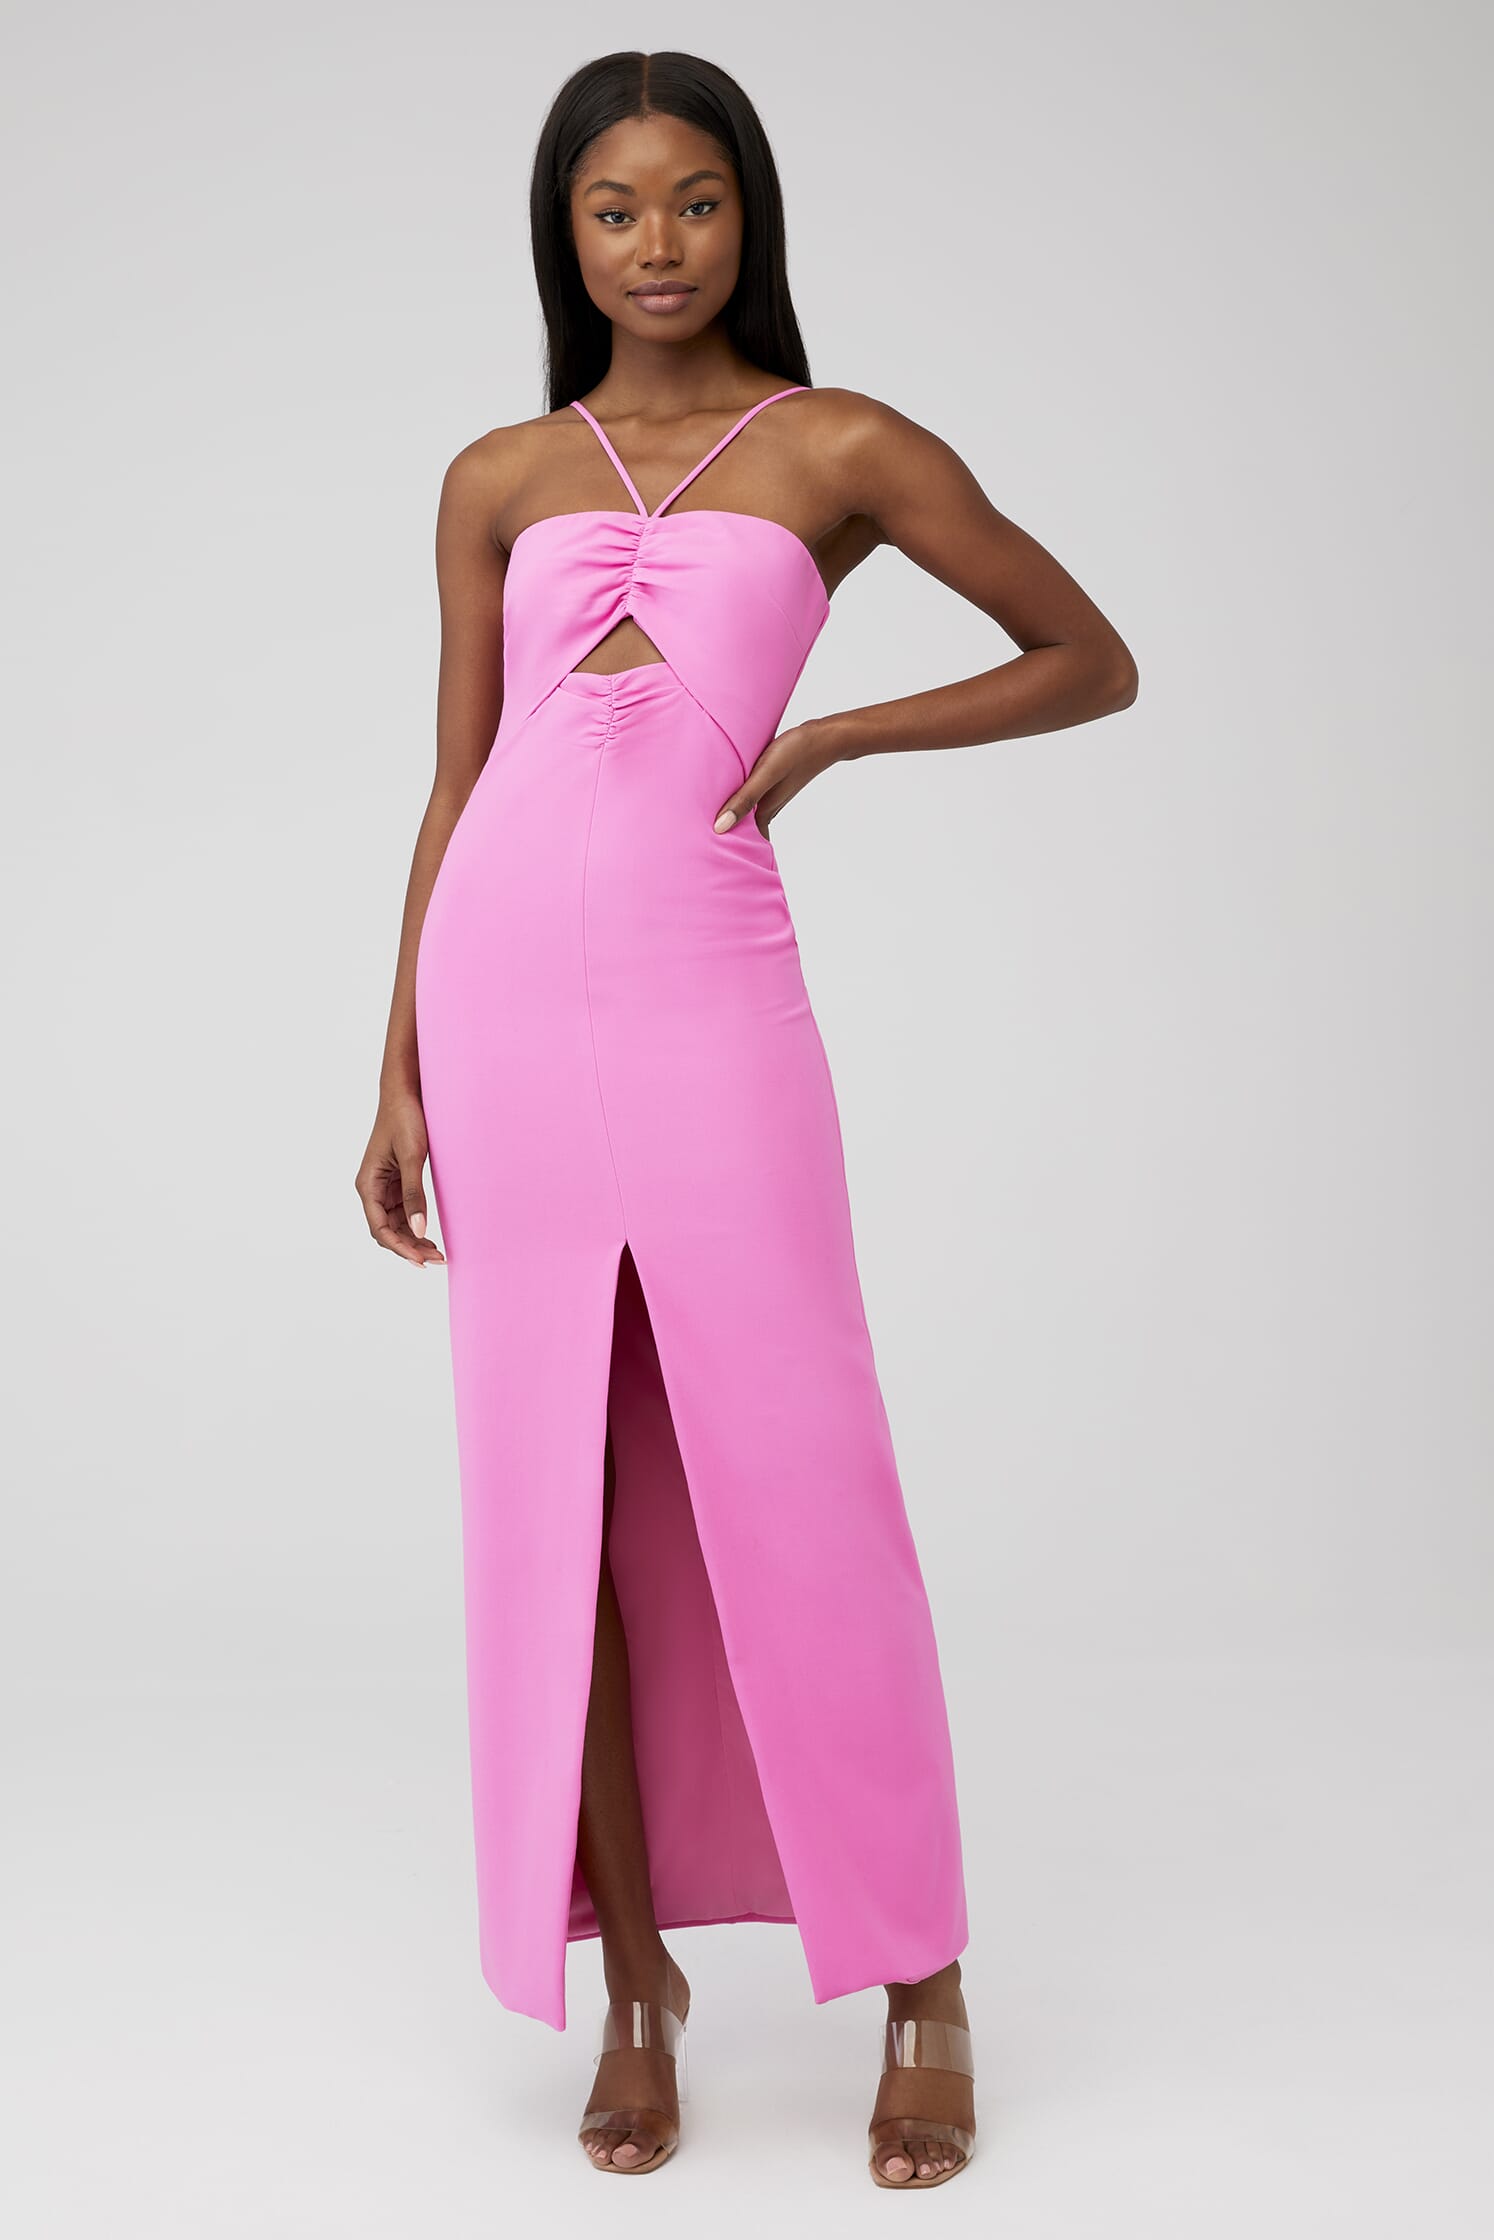 LIKELY | Rocky Gown in Pink Sugar| FashionPass